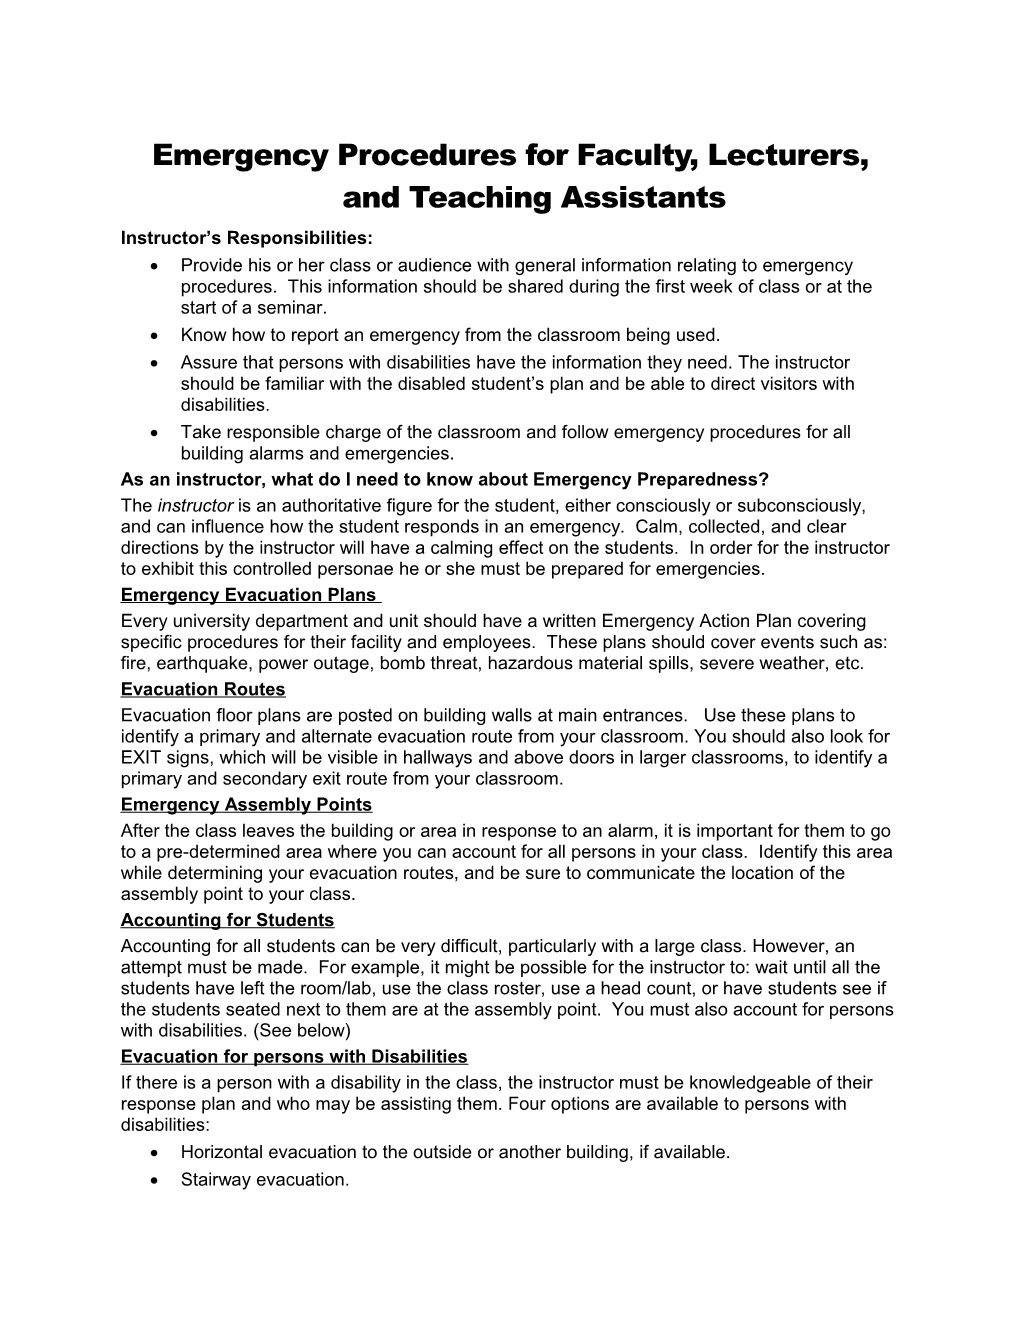 Emergency Procedures for Faculty, Lecturers, and Teaching Assistants